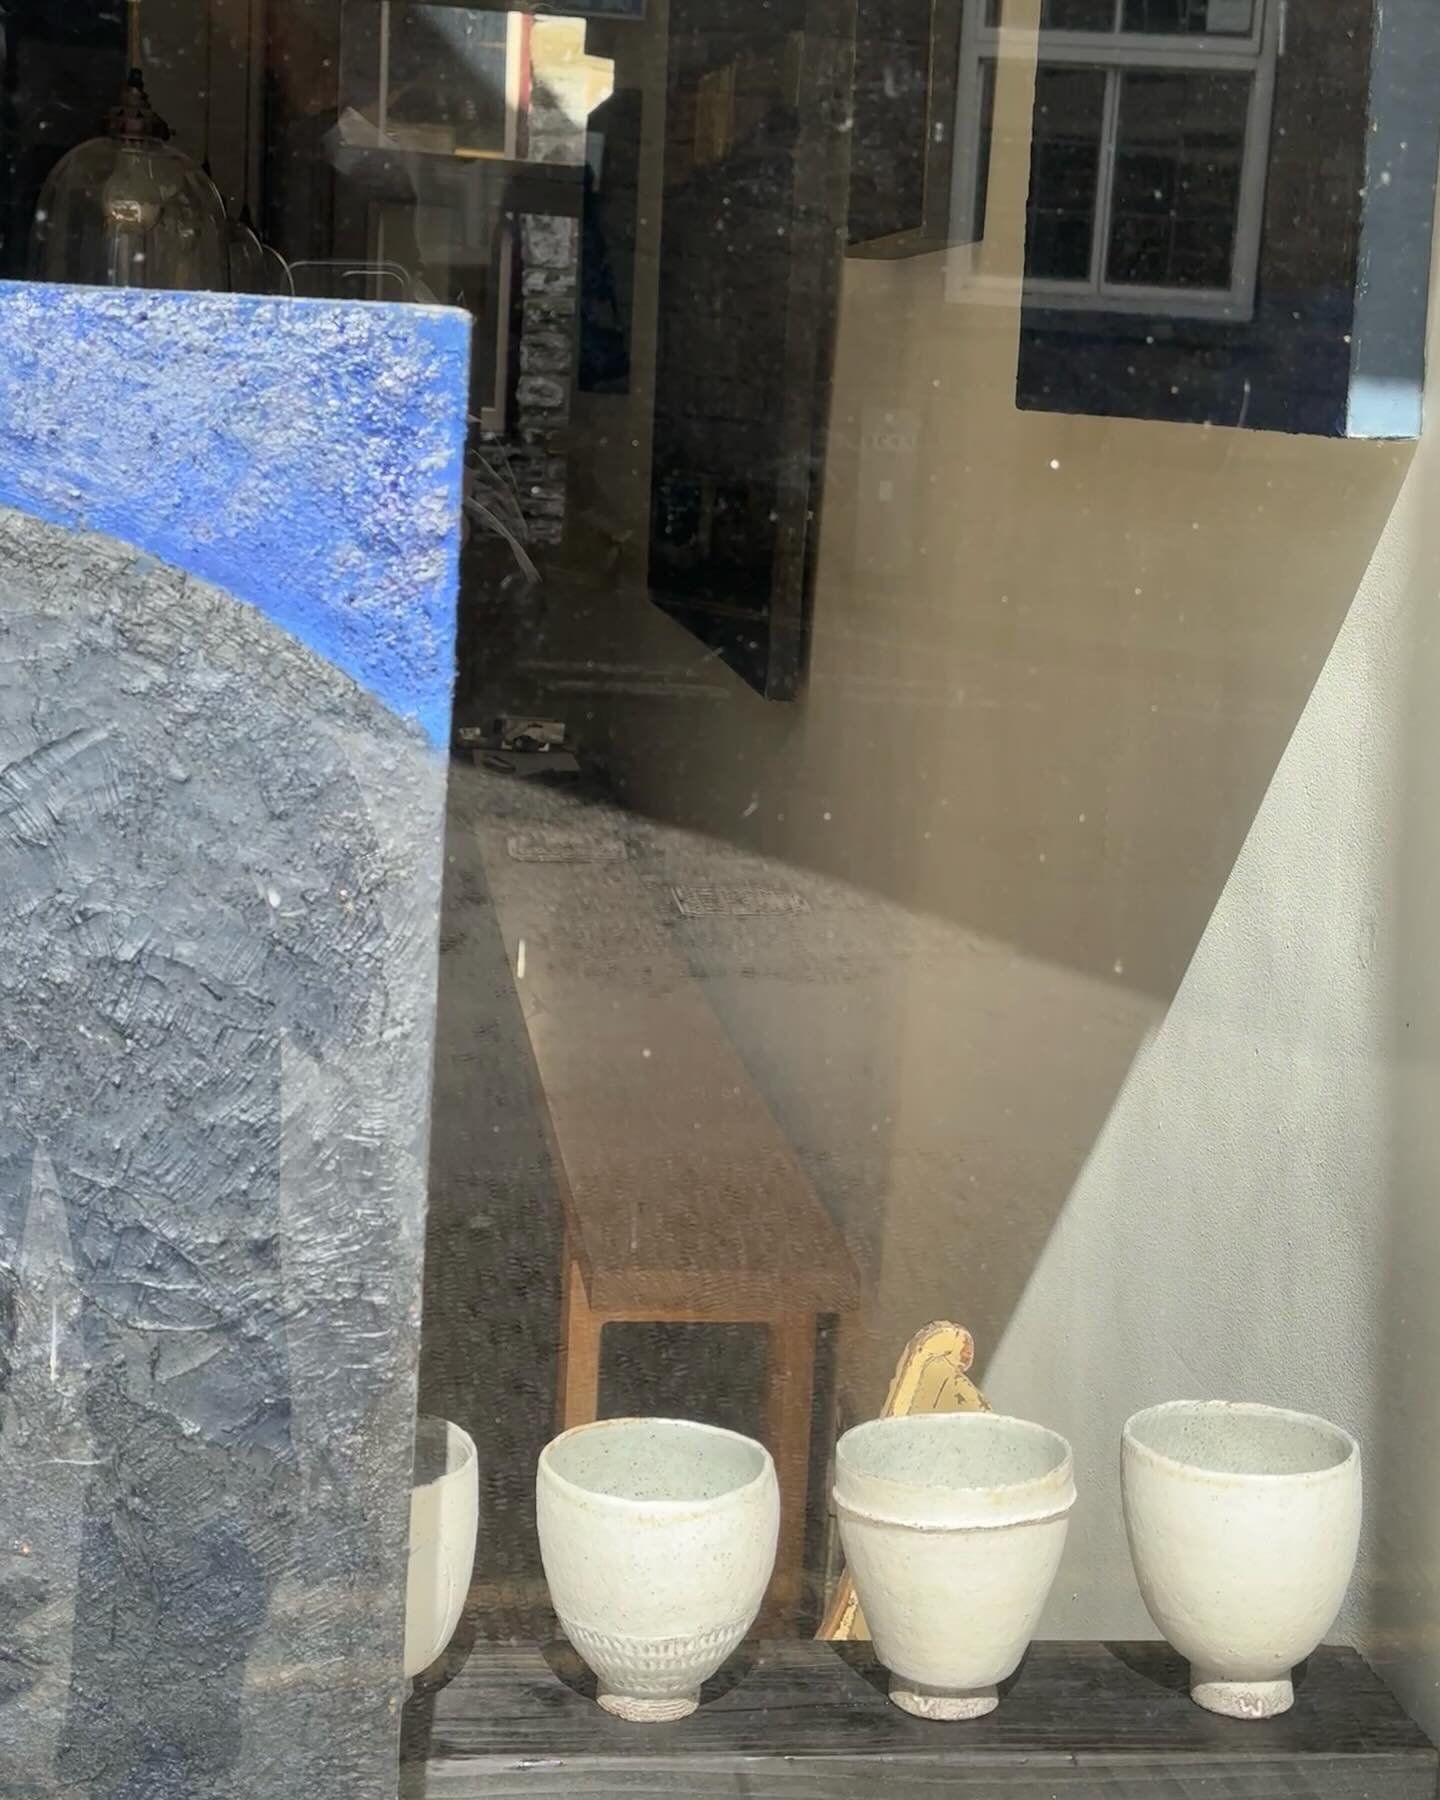 Through the window .. a taster of the window display and reflections of this amazing show opening this Saturday 20th April with paintings by @annettedemestre and ceramics by Clare Walters @p_l_o_u_g_h_s_t_u_d_i_o and if you can&rsquo;t make the PV at